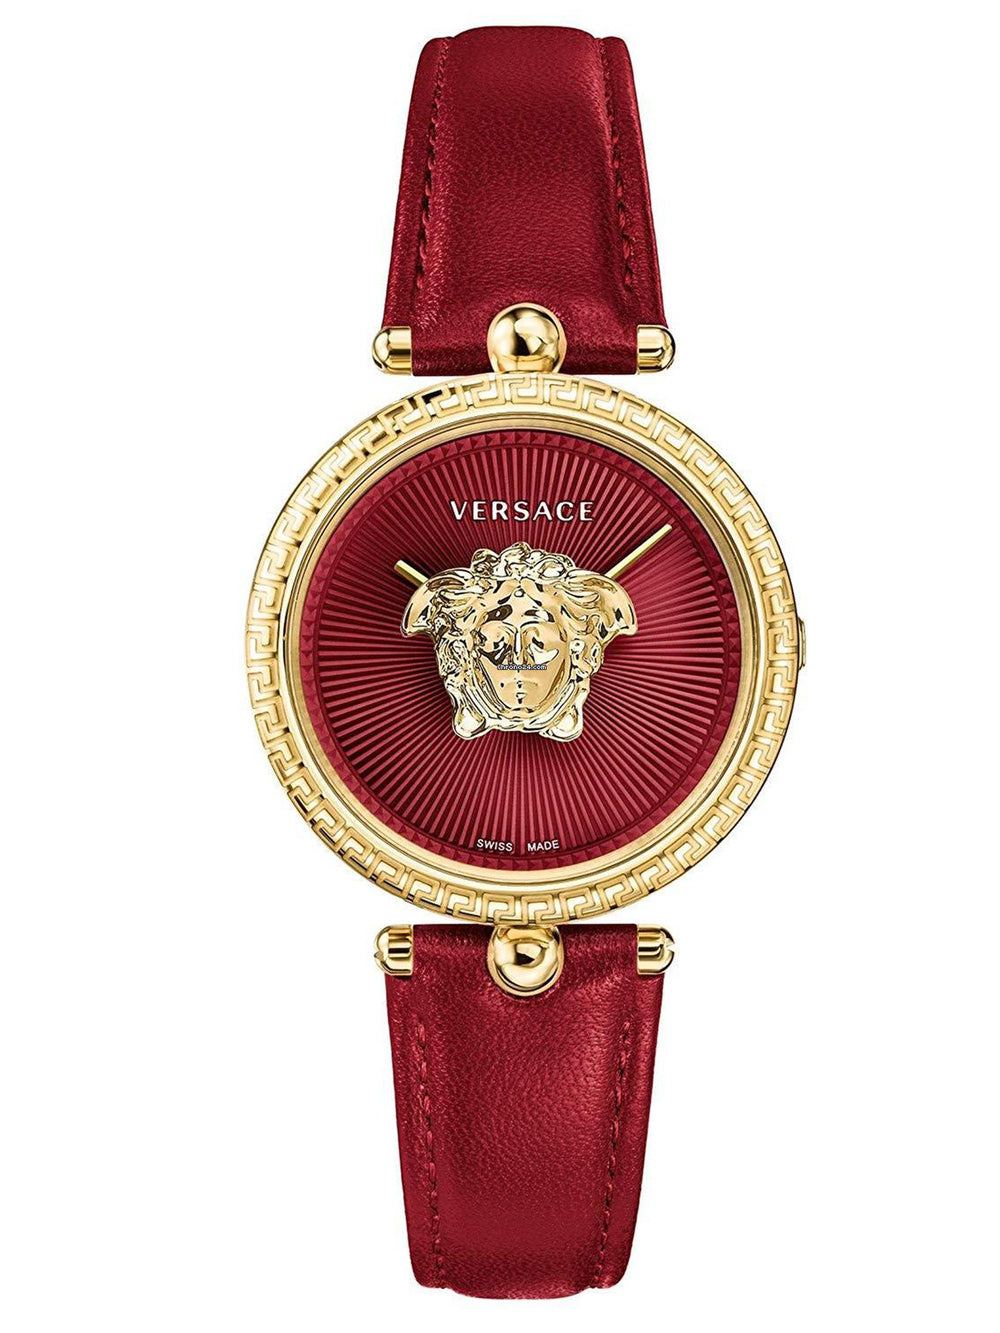 Versace Ladies Watch Palazzo Empire 34mm Red Gold VECQ00418